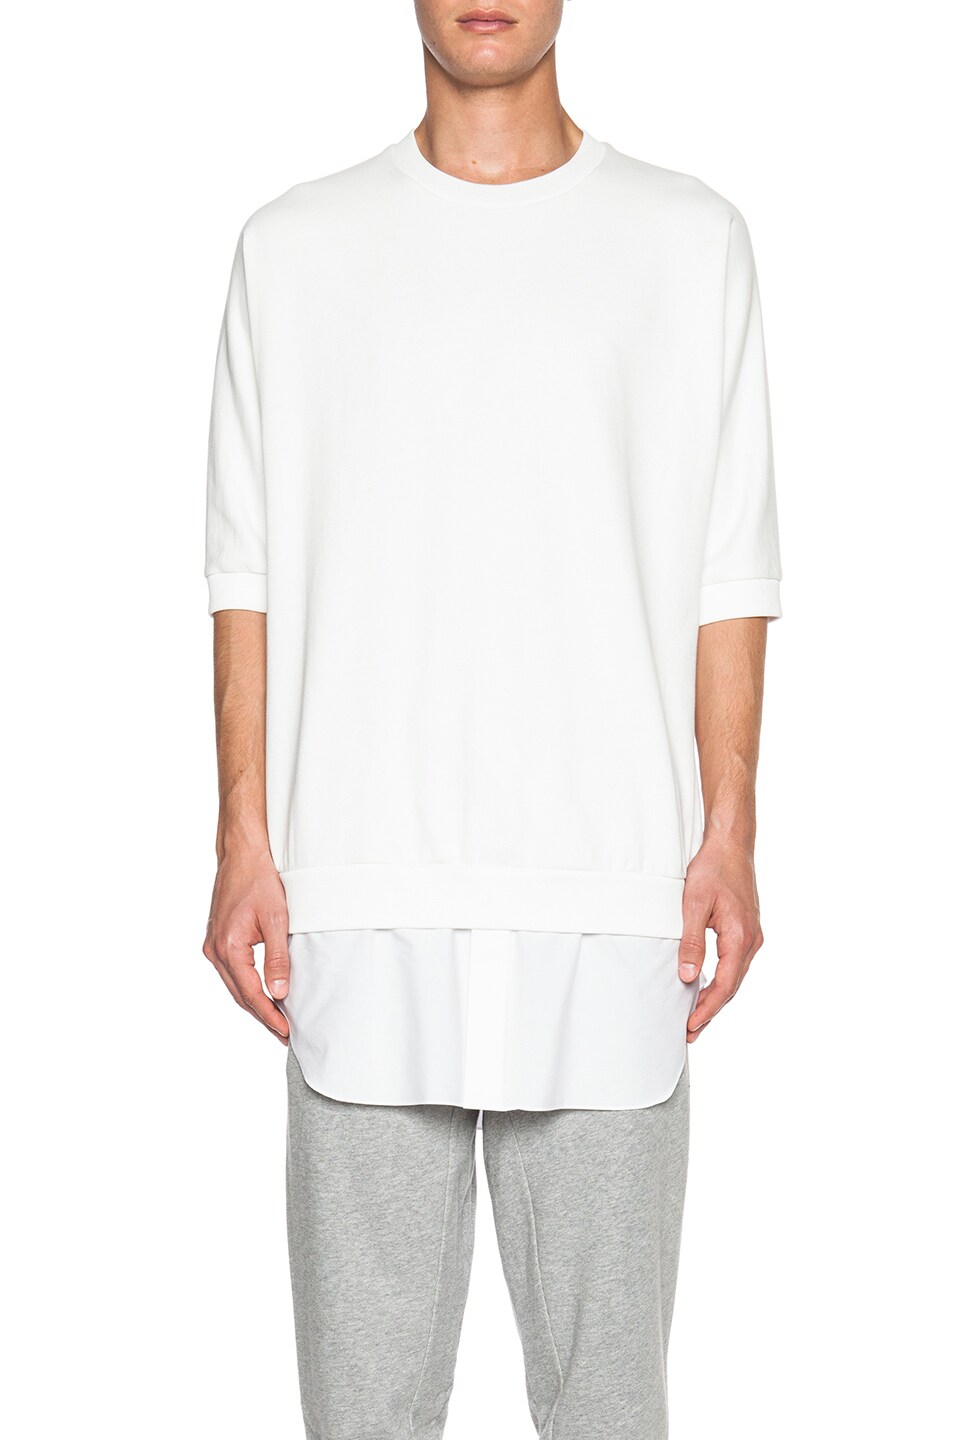 Image 1 of 3.1 phillip lim Short Sleeve Pullover with Poplin Shirt Tail in Antique White